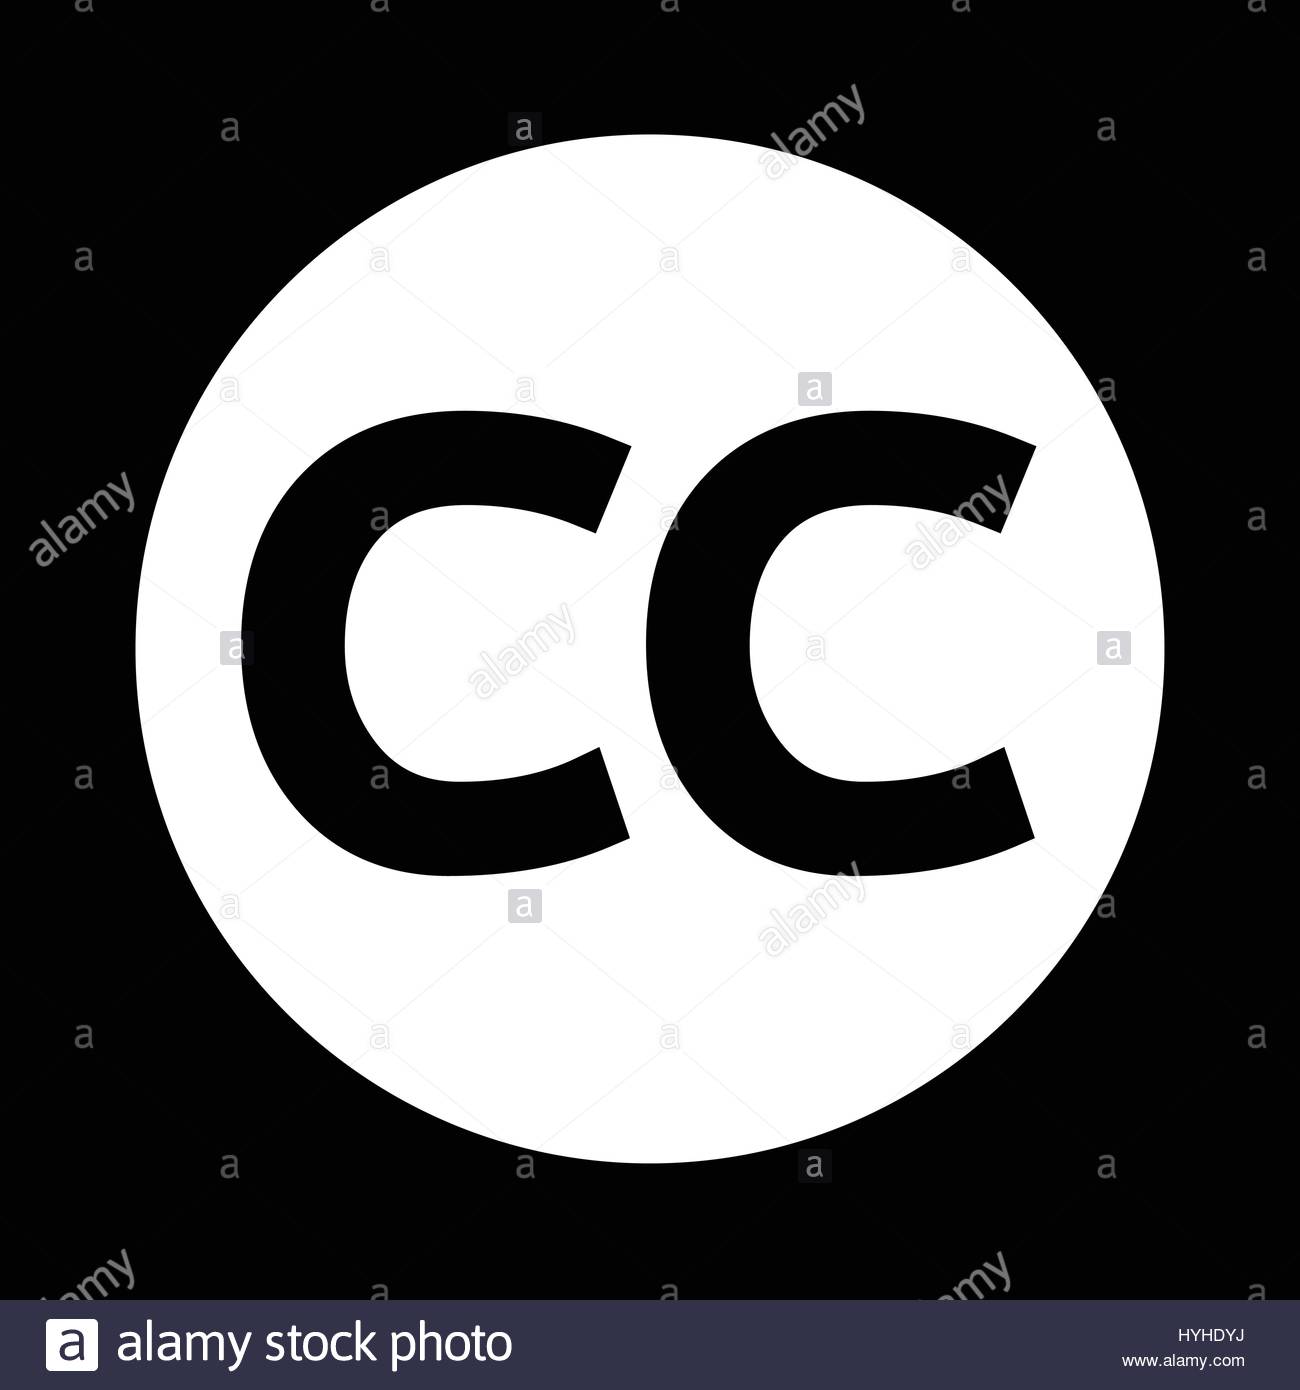 Creative commons license symbol - Free interface icons